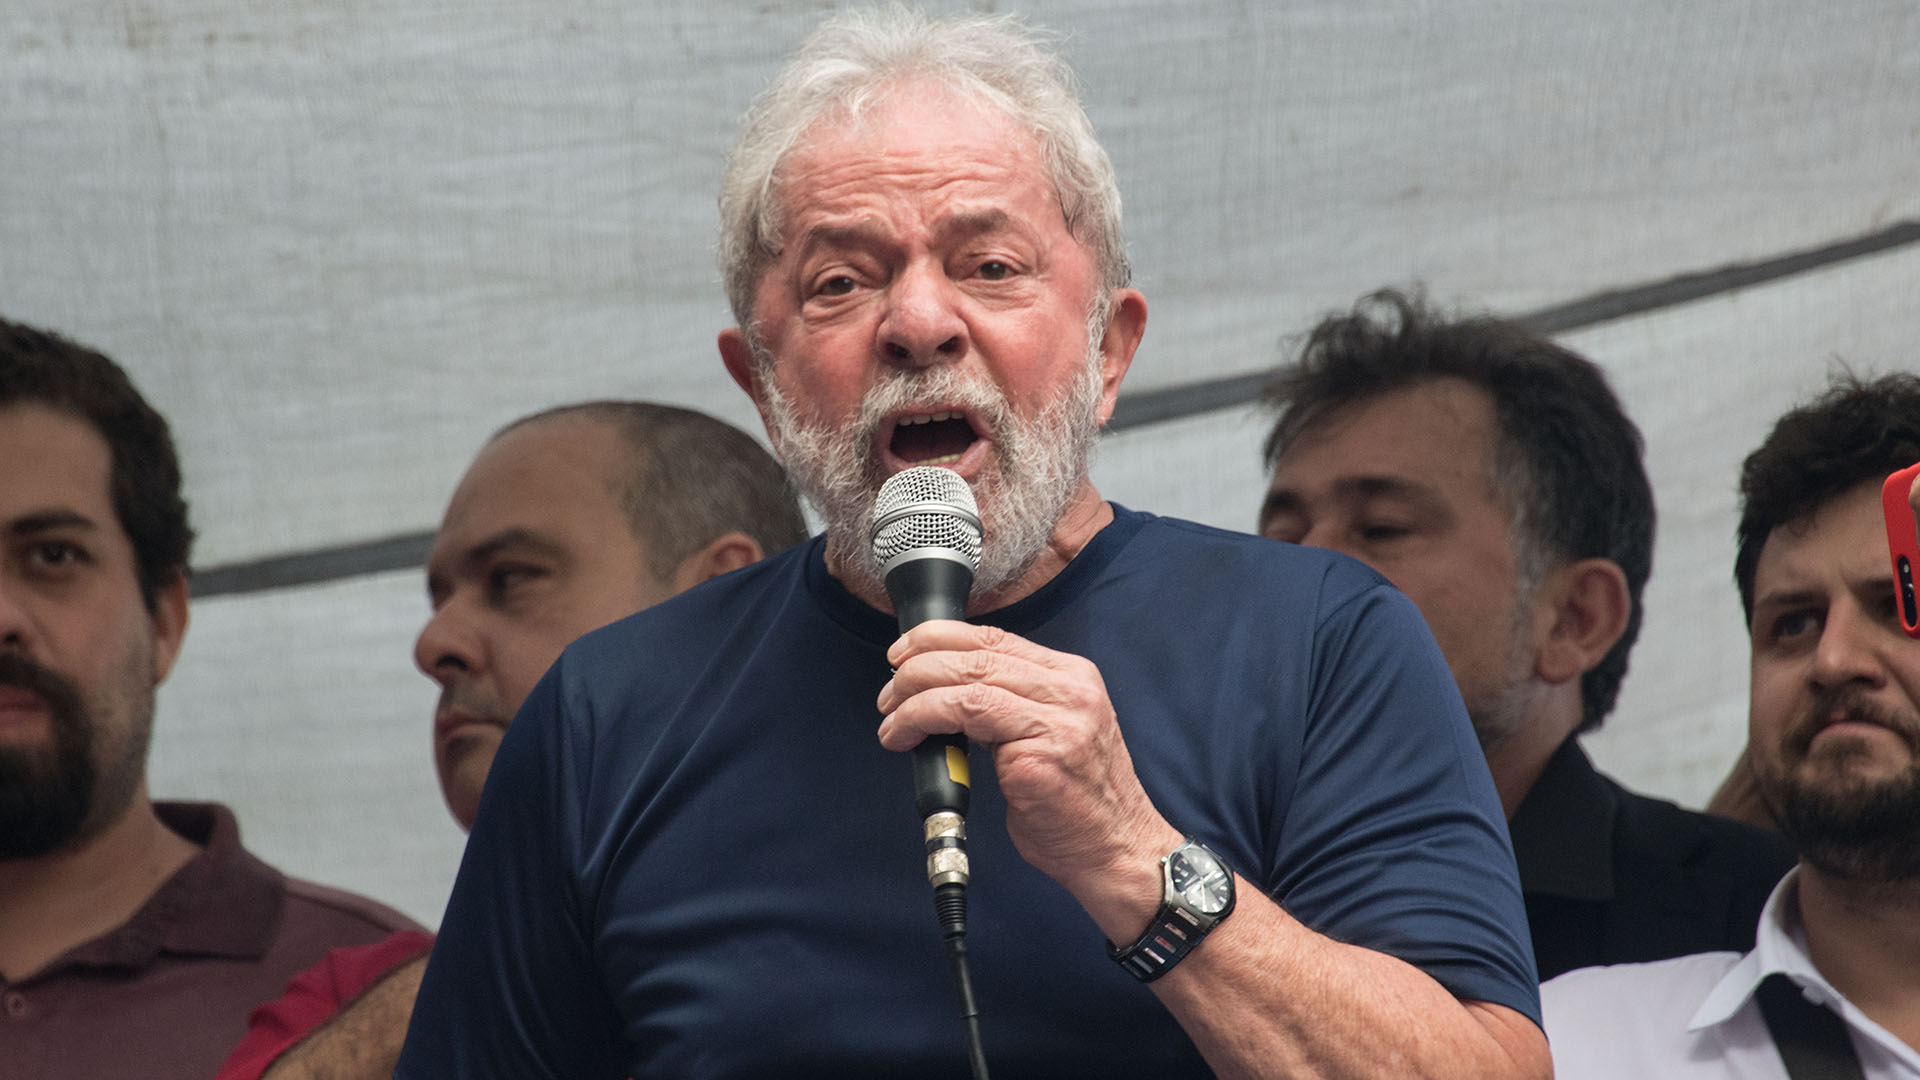 Brazilian ex-president (2003-2011) Luiz Inacio Lula da Silva (L) speaks during a Catholic mass in memory of Lula's late wife Marisa Leticia, at the metalworkers' union building in Sao Bernardo do Campo, in metropolitan Sao Paulo, Brazil, on April 7, 2018.
Brazil's election frontrunner and controversial leftist icon said Saturday that he will comply with an arrest warrant to start a 12-year sentence for corruption. "I will comply with their warrant," he told a crowd of supporters. / AFP PHOTO / NELSON ALMEIDA